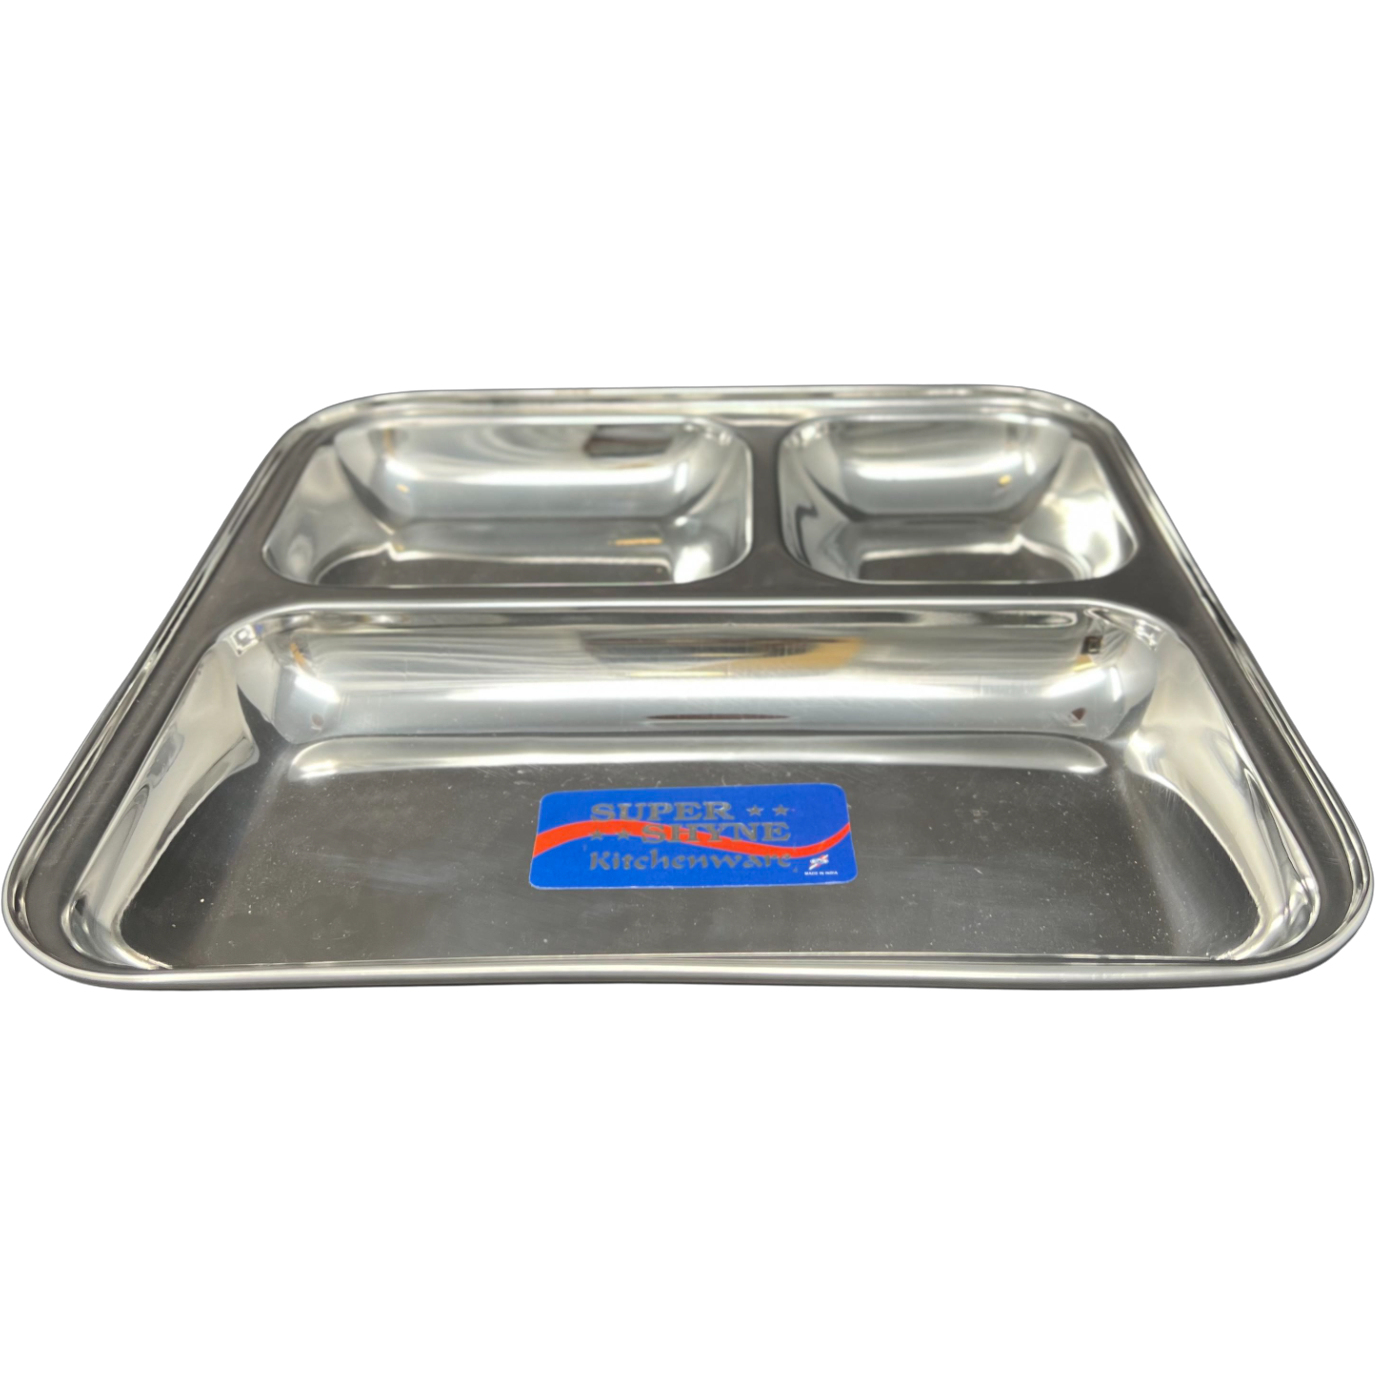 Super Shyne Stainless Steel 3 Section Square Lunch Tray - 9.5 In